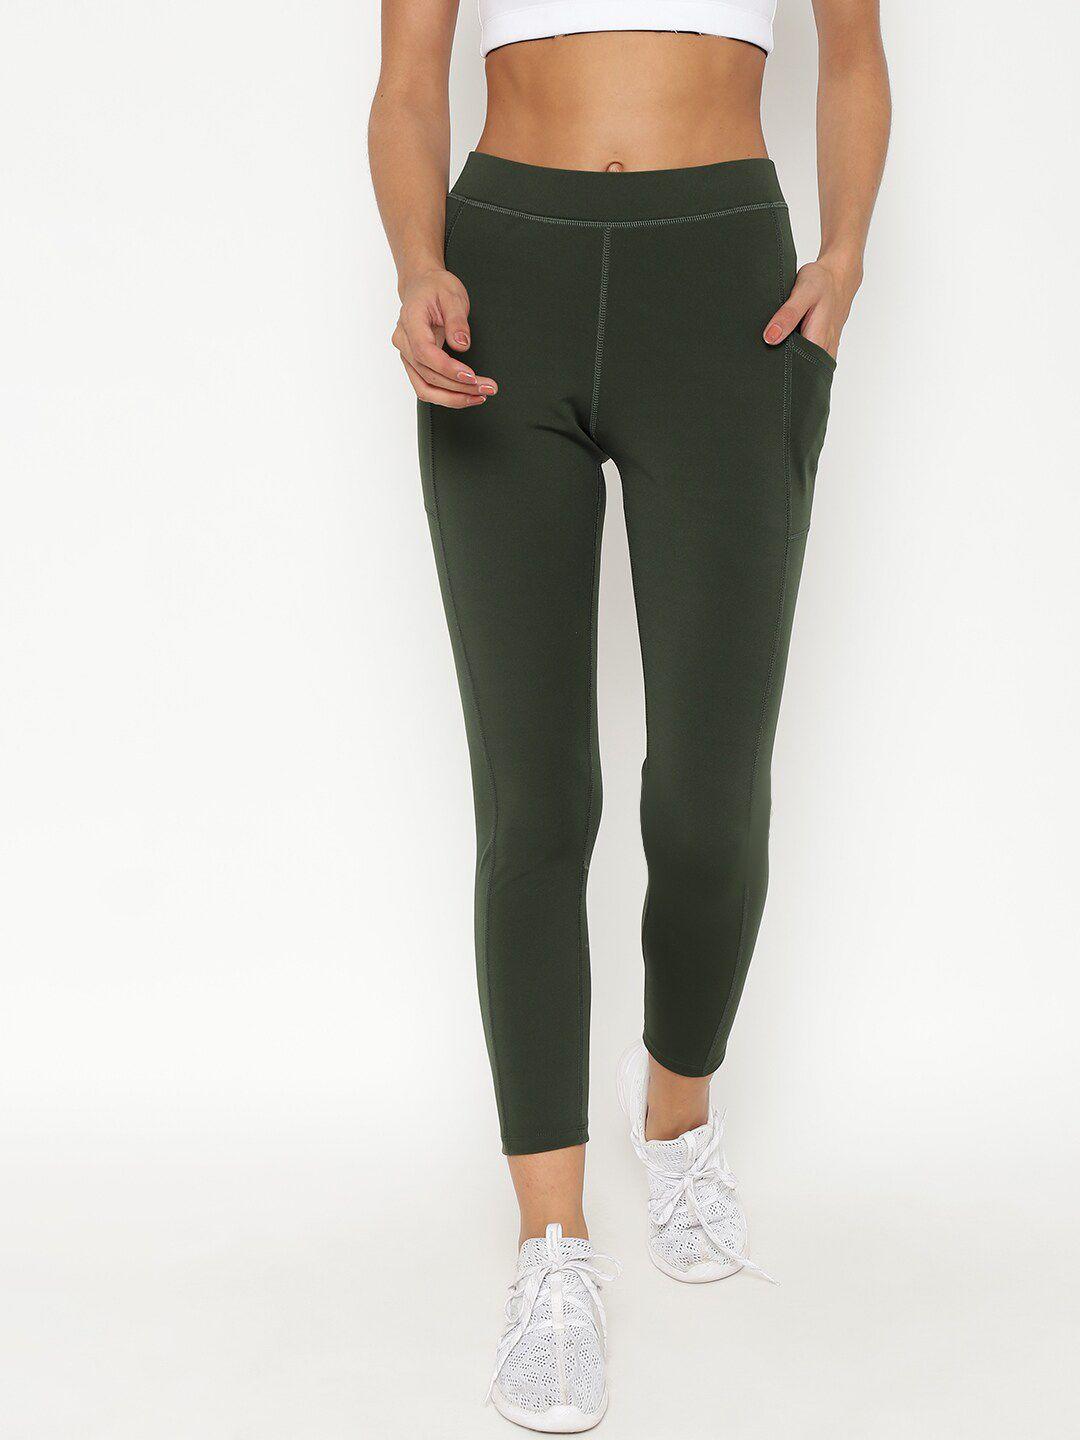 chkokko women olive-green solid gym tights